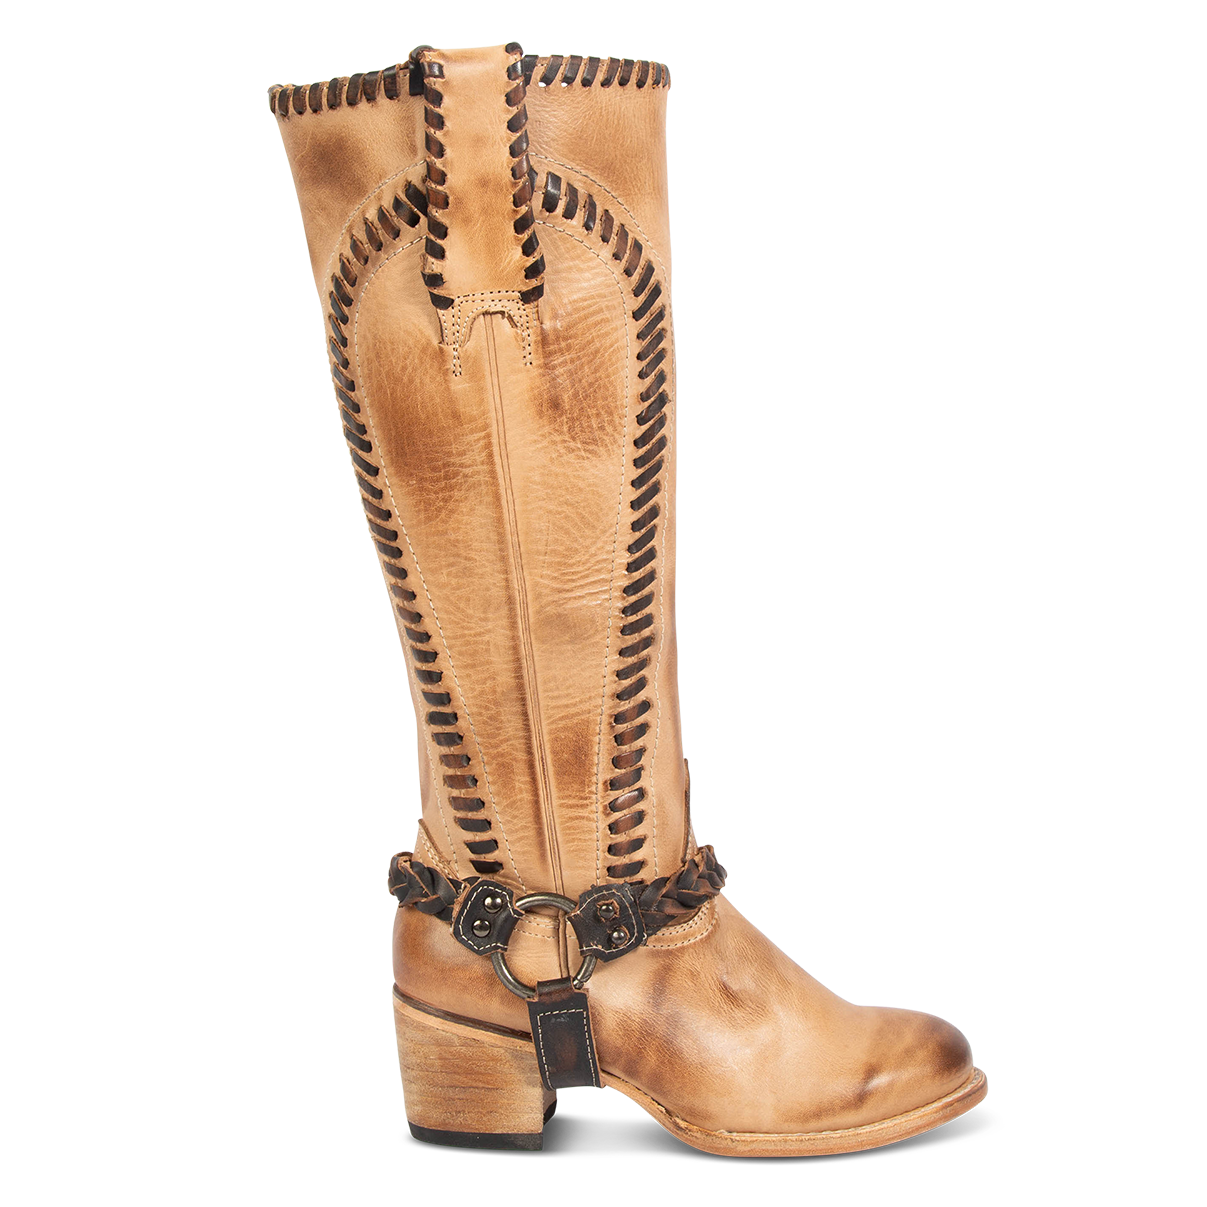 FREEBIRD women's Clover beige leather boot with whip stitch detailing, inside half zip closure and braided ankle harness